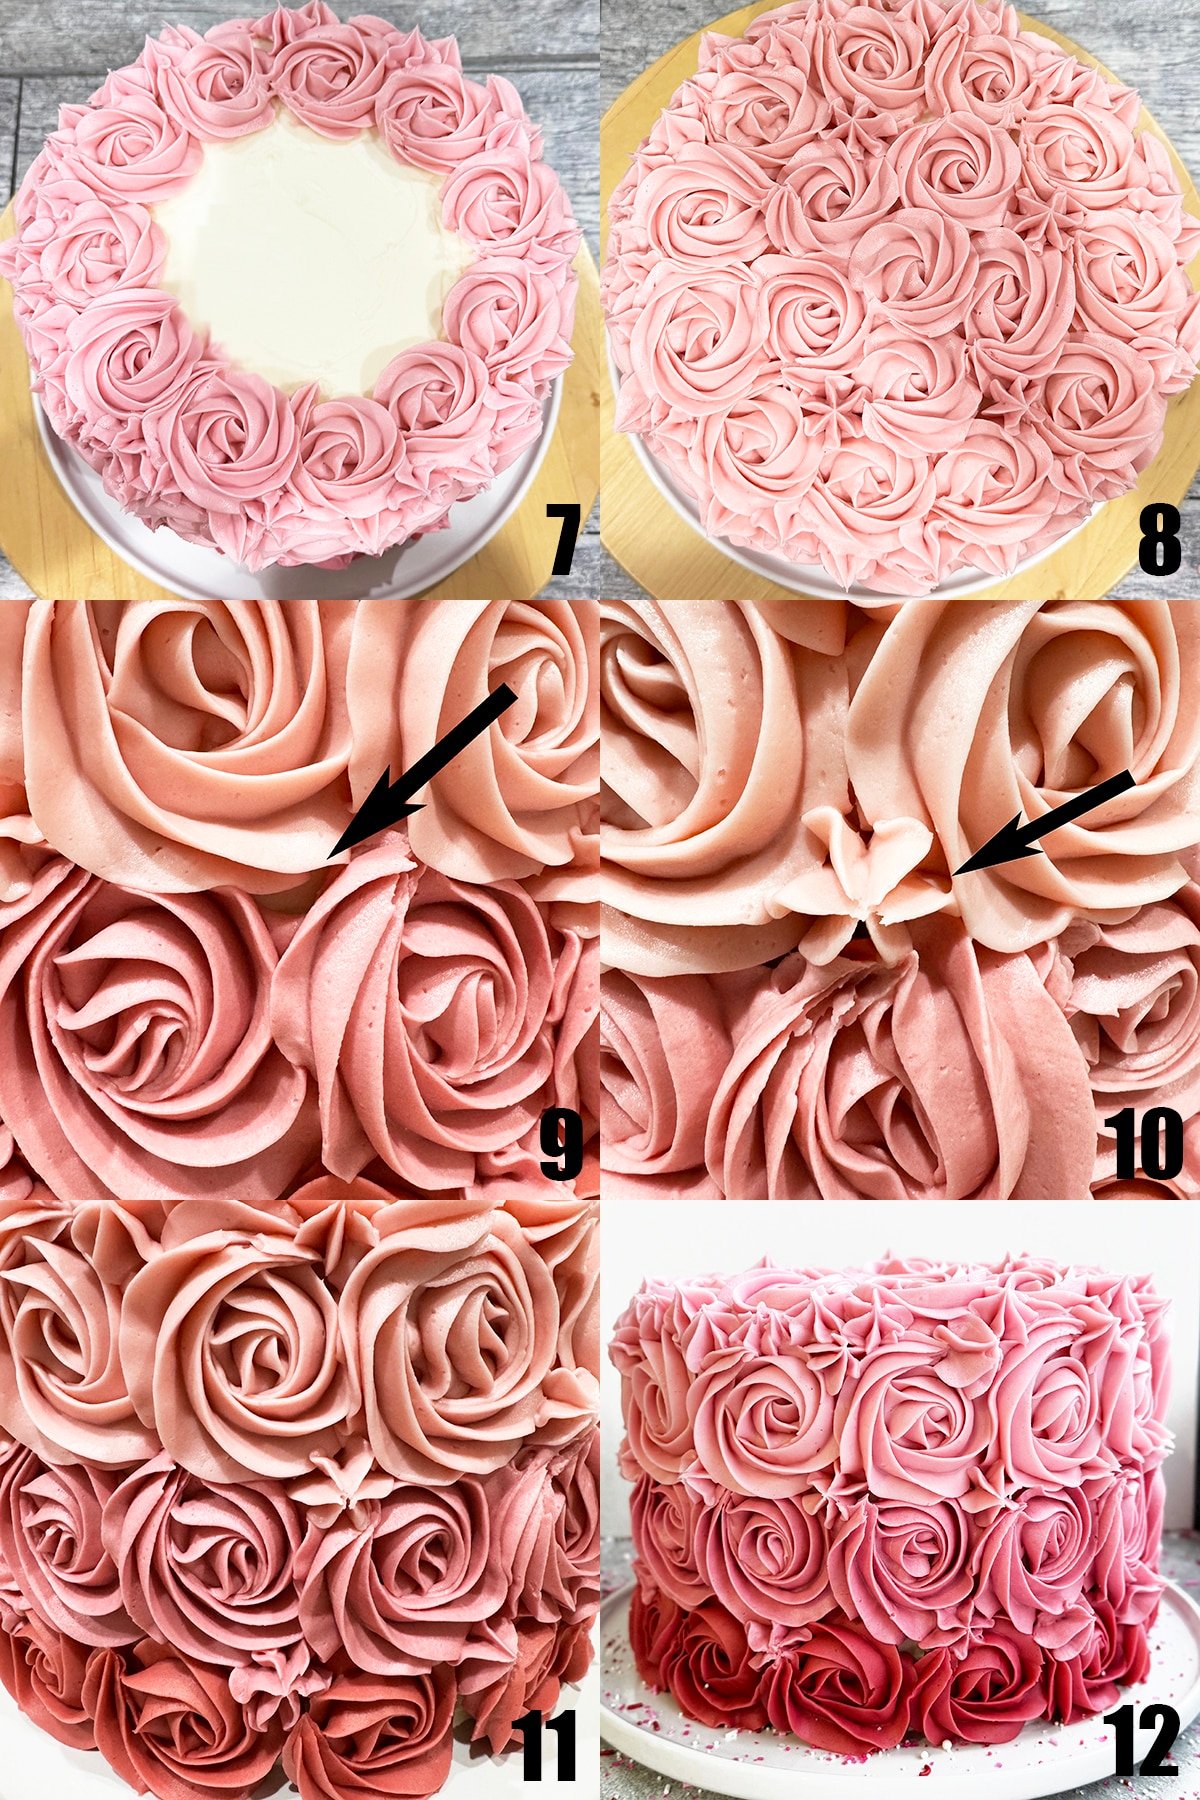 Collage Image With Step by Step Process Shots on How to Make Pink Ombre Cake- Part 2. 